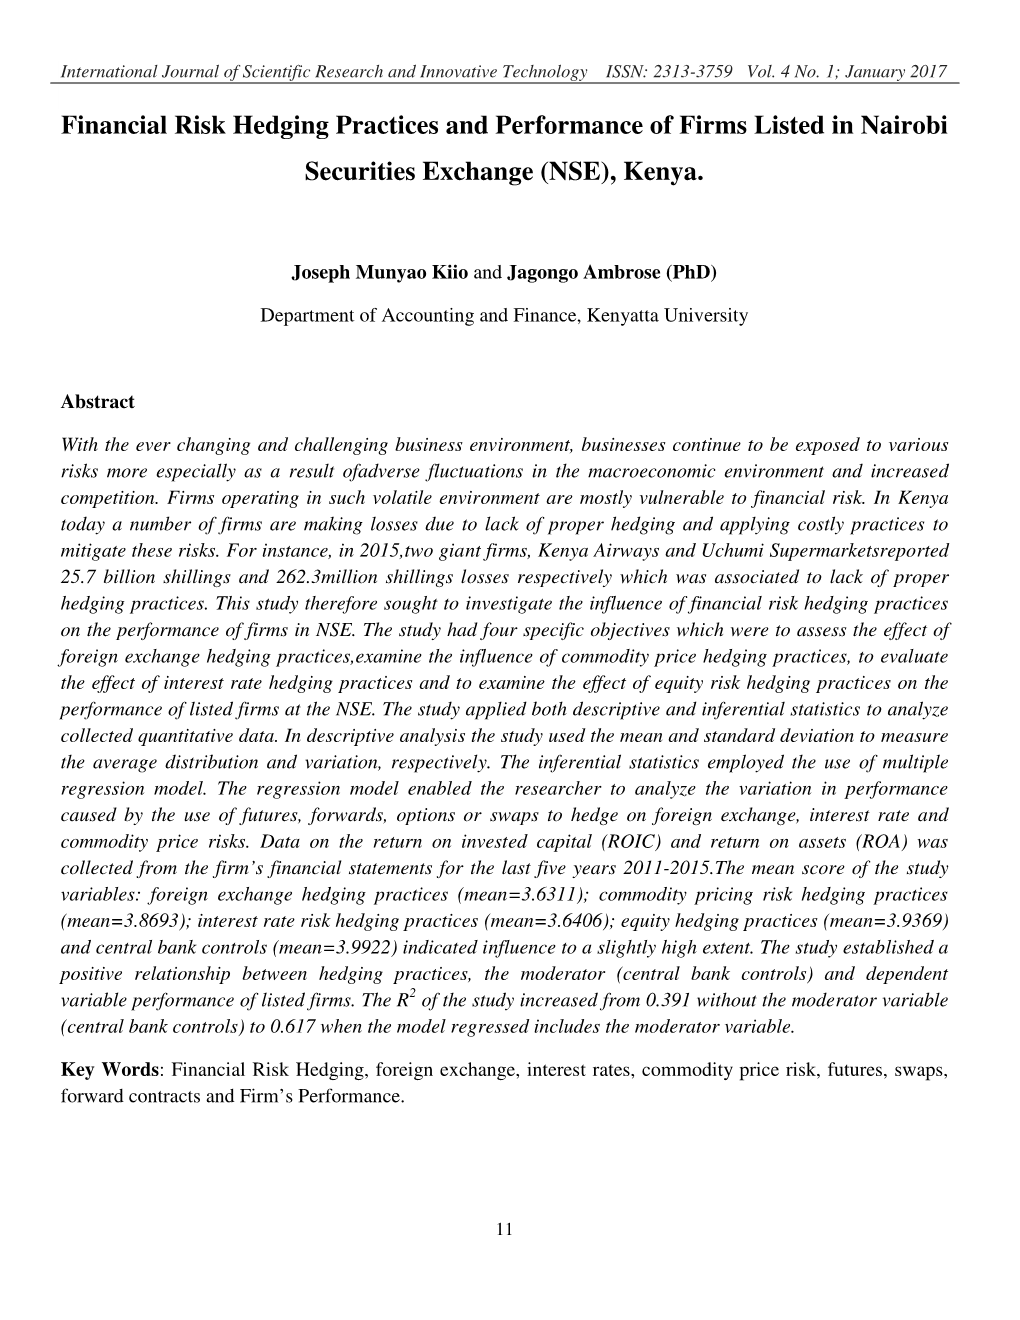 Financial Risk Hedging Practices and Performance of Firms Listed in Nairobi Securities Exchange (NSE), Kenya